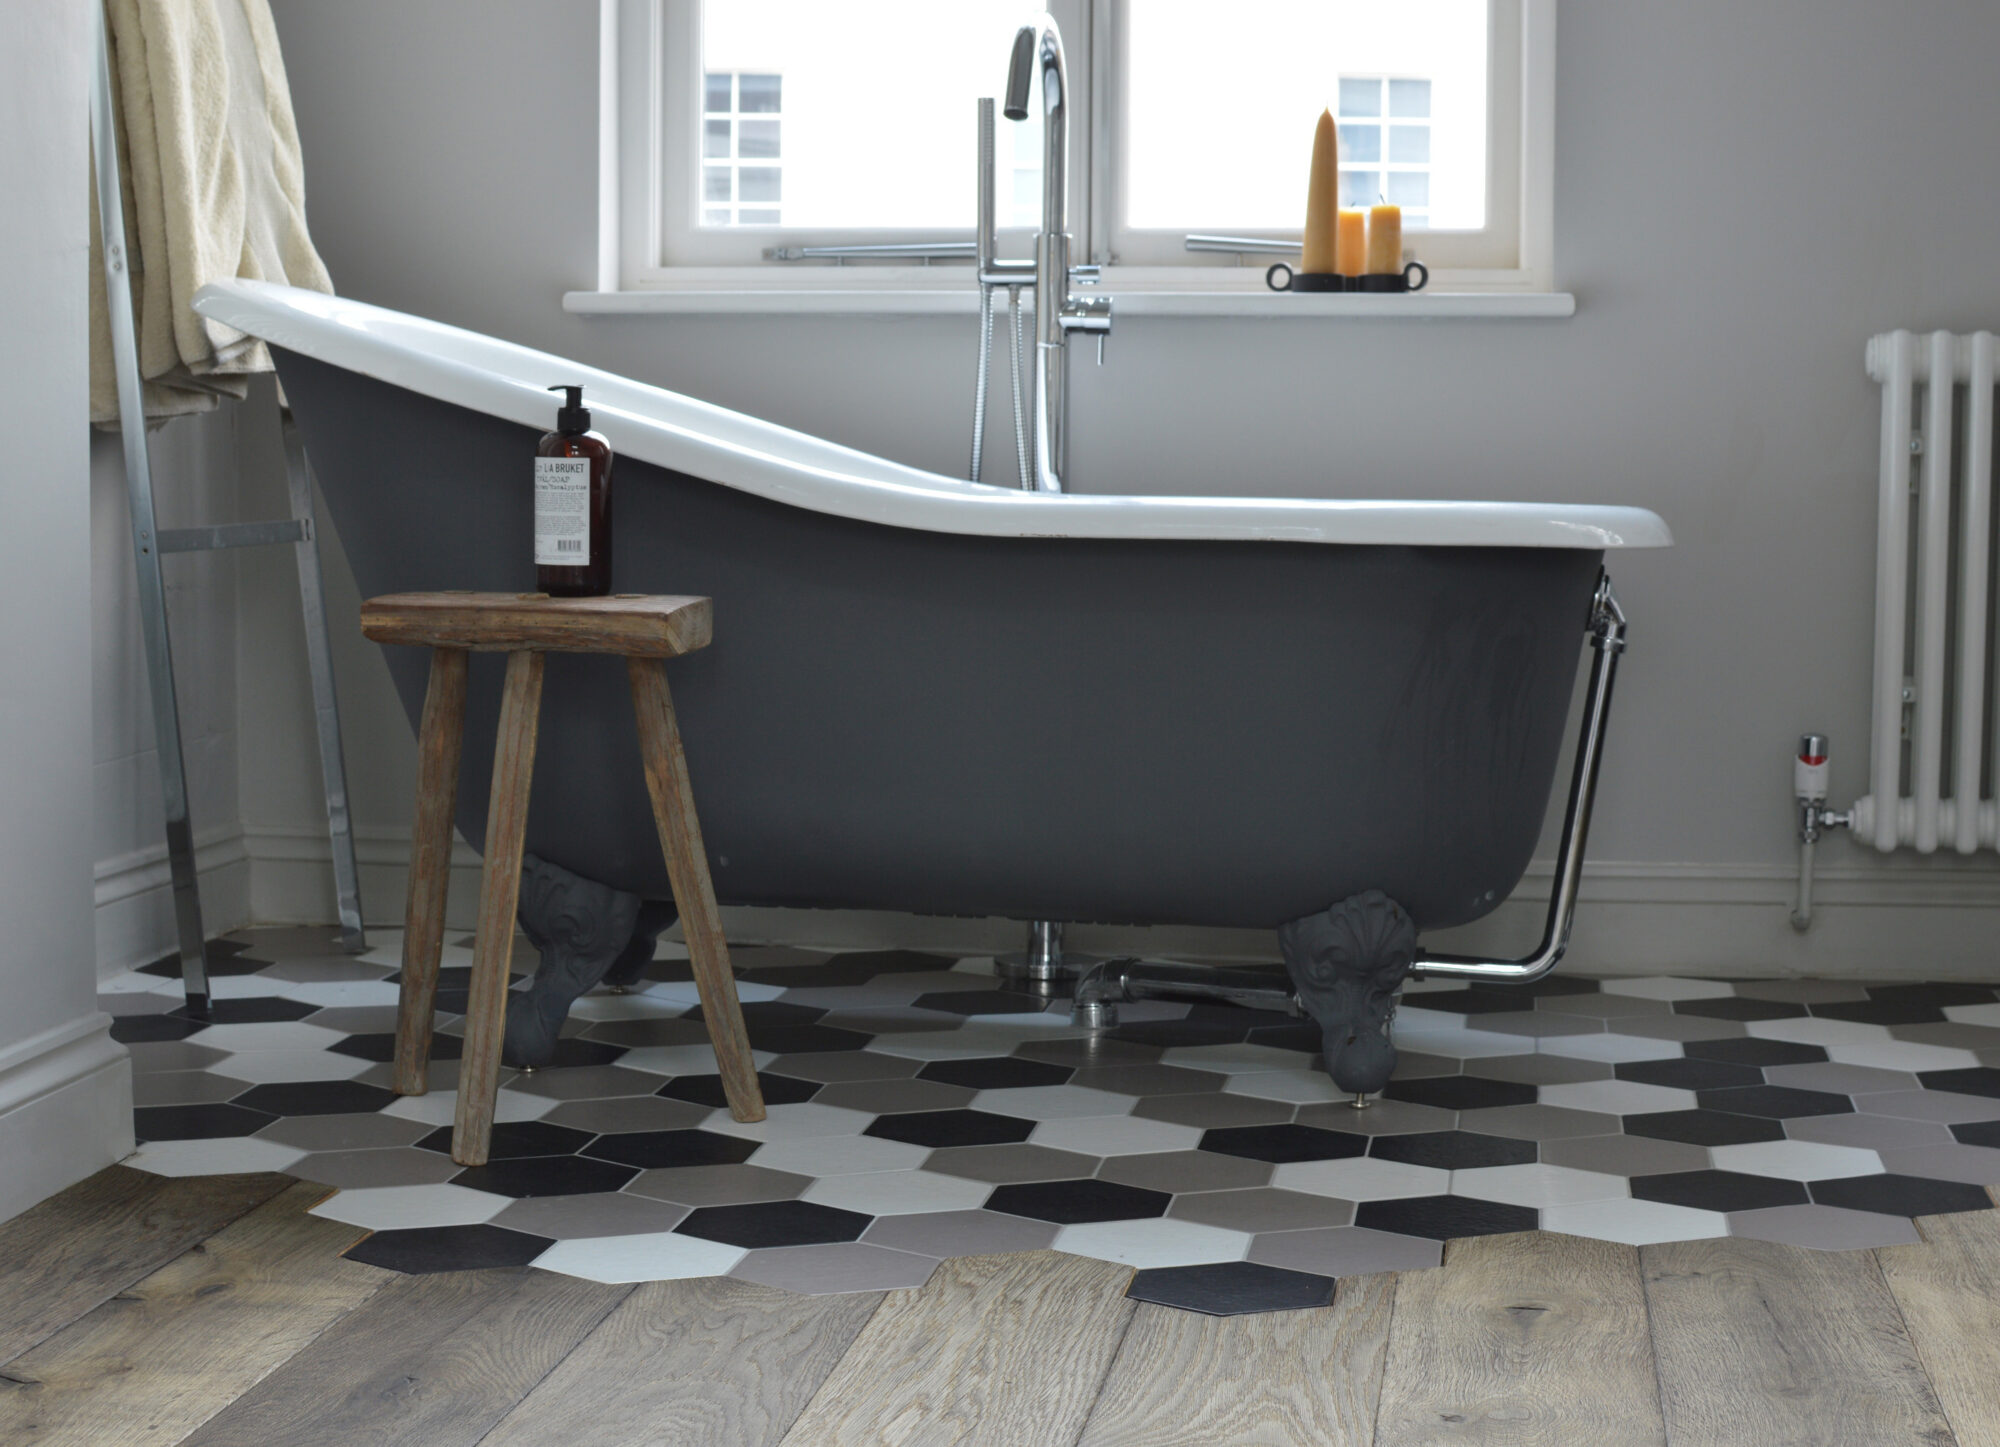 Oak magma stromboli plank meeting hexagon tiles with a free standing bath and wooden stool